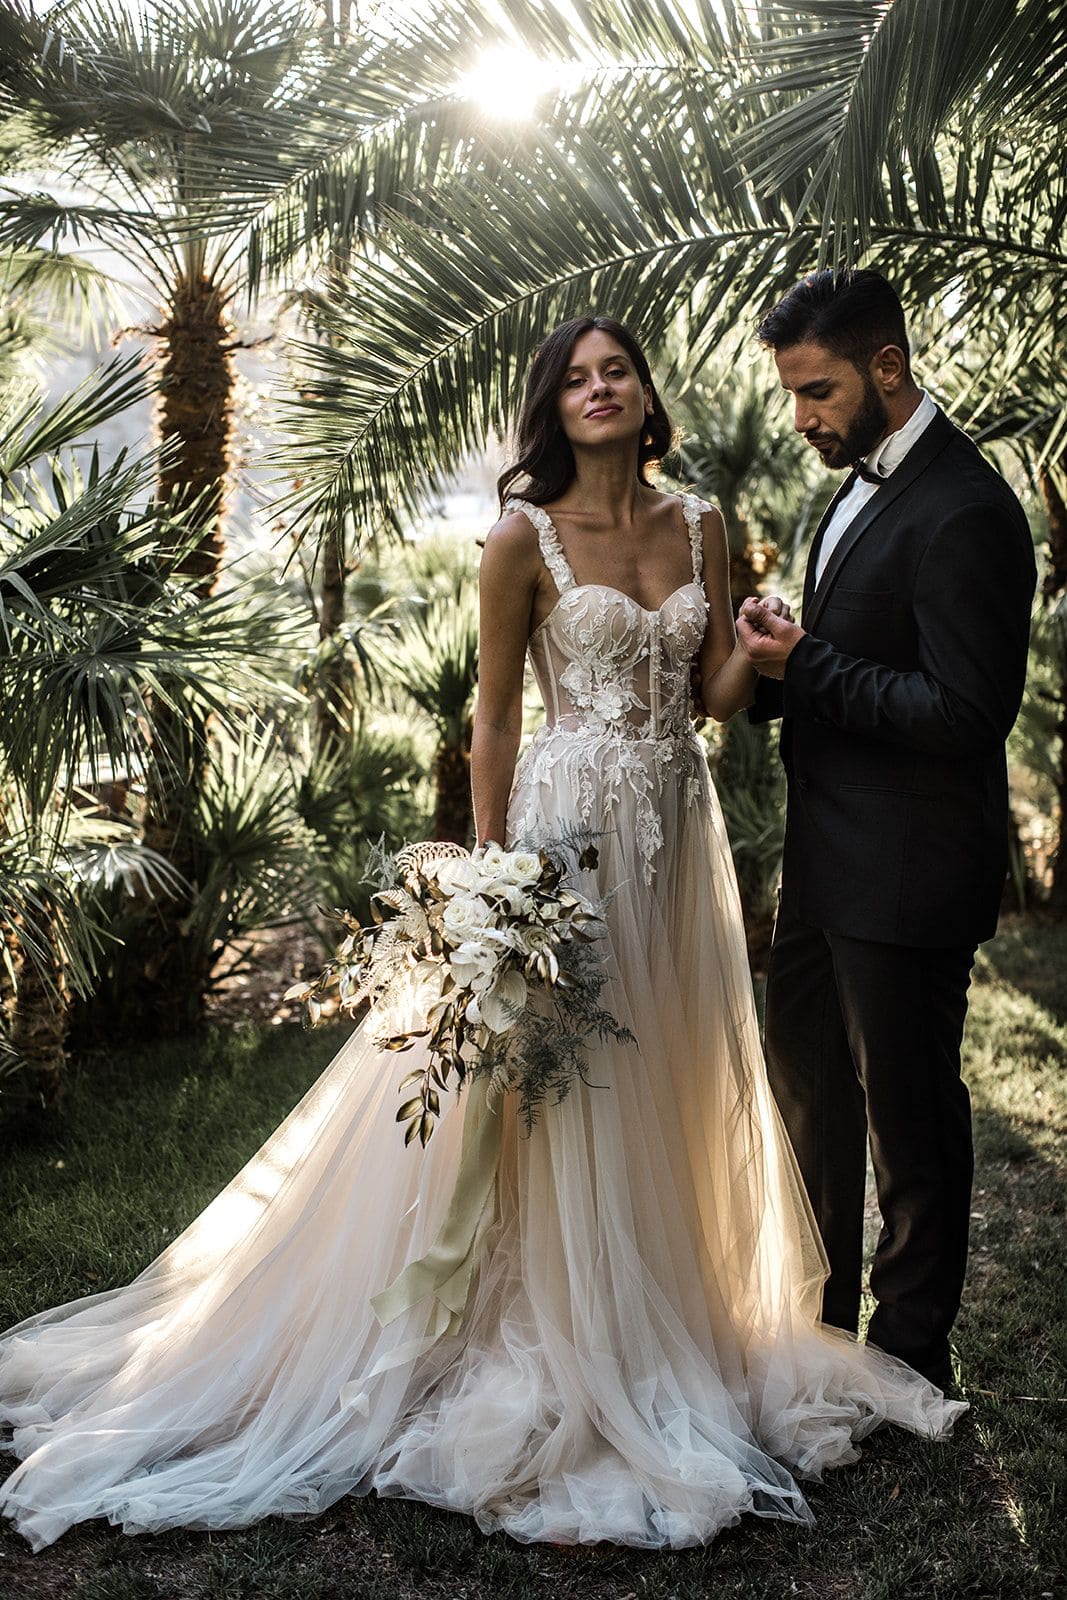 Bride and groom stand together in tropical garden in Amalfi Coast